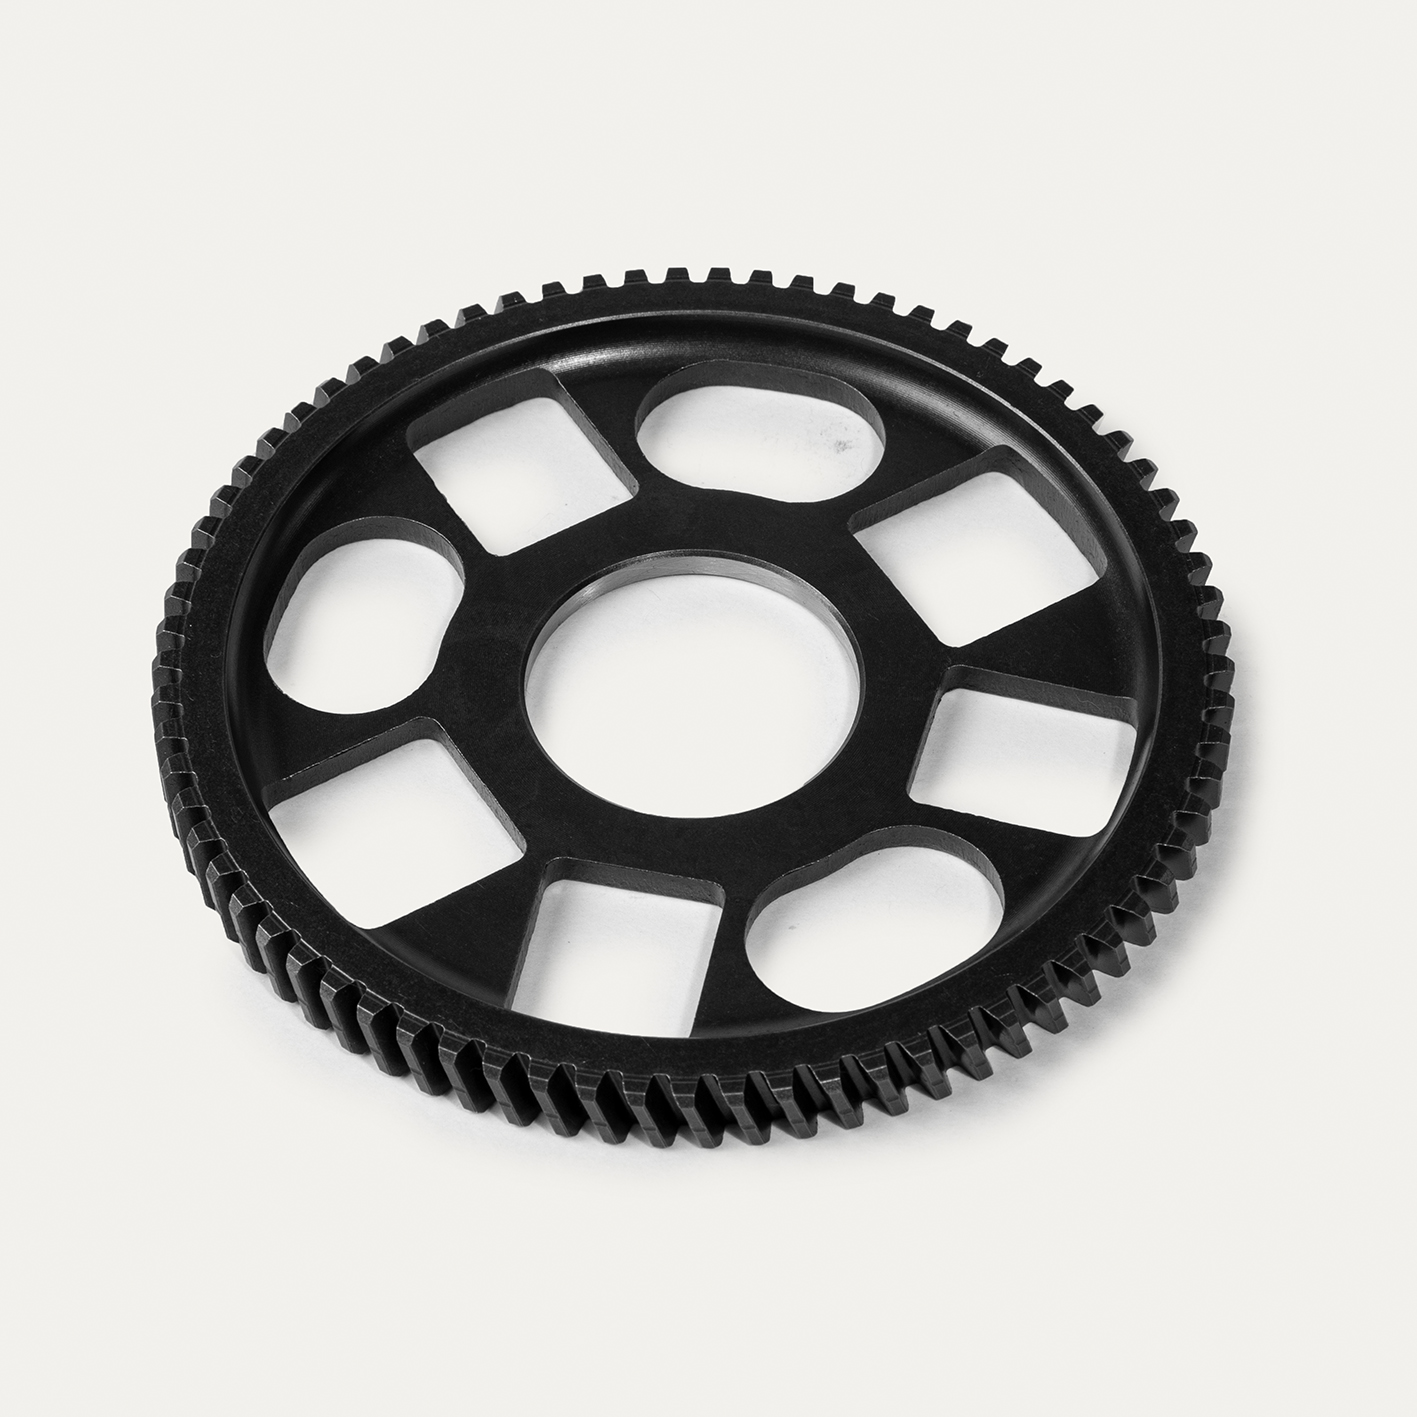 gear primary driven assembly platina